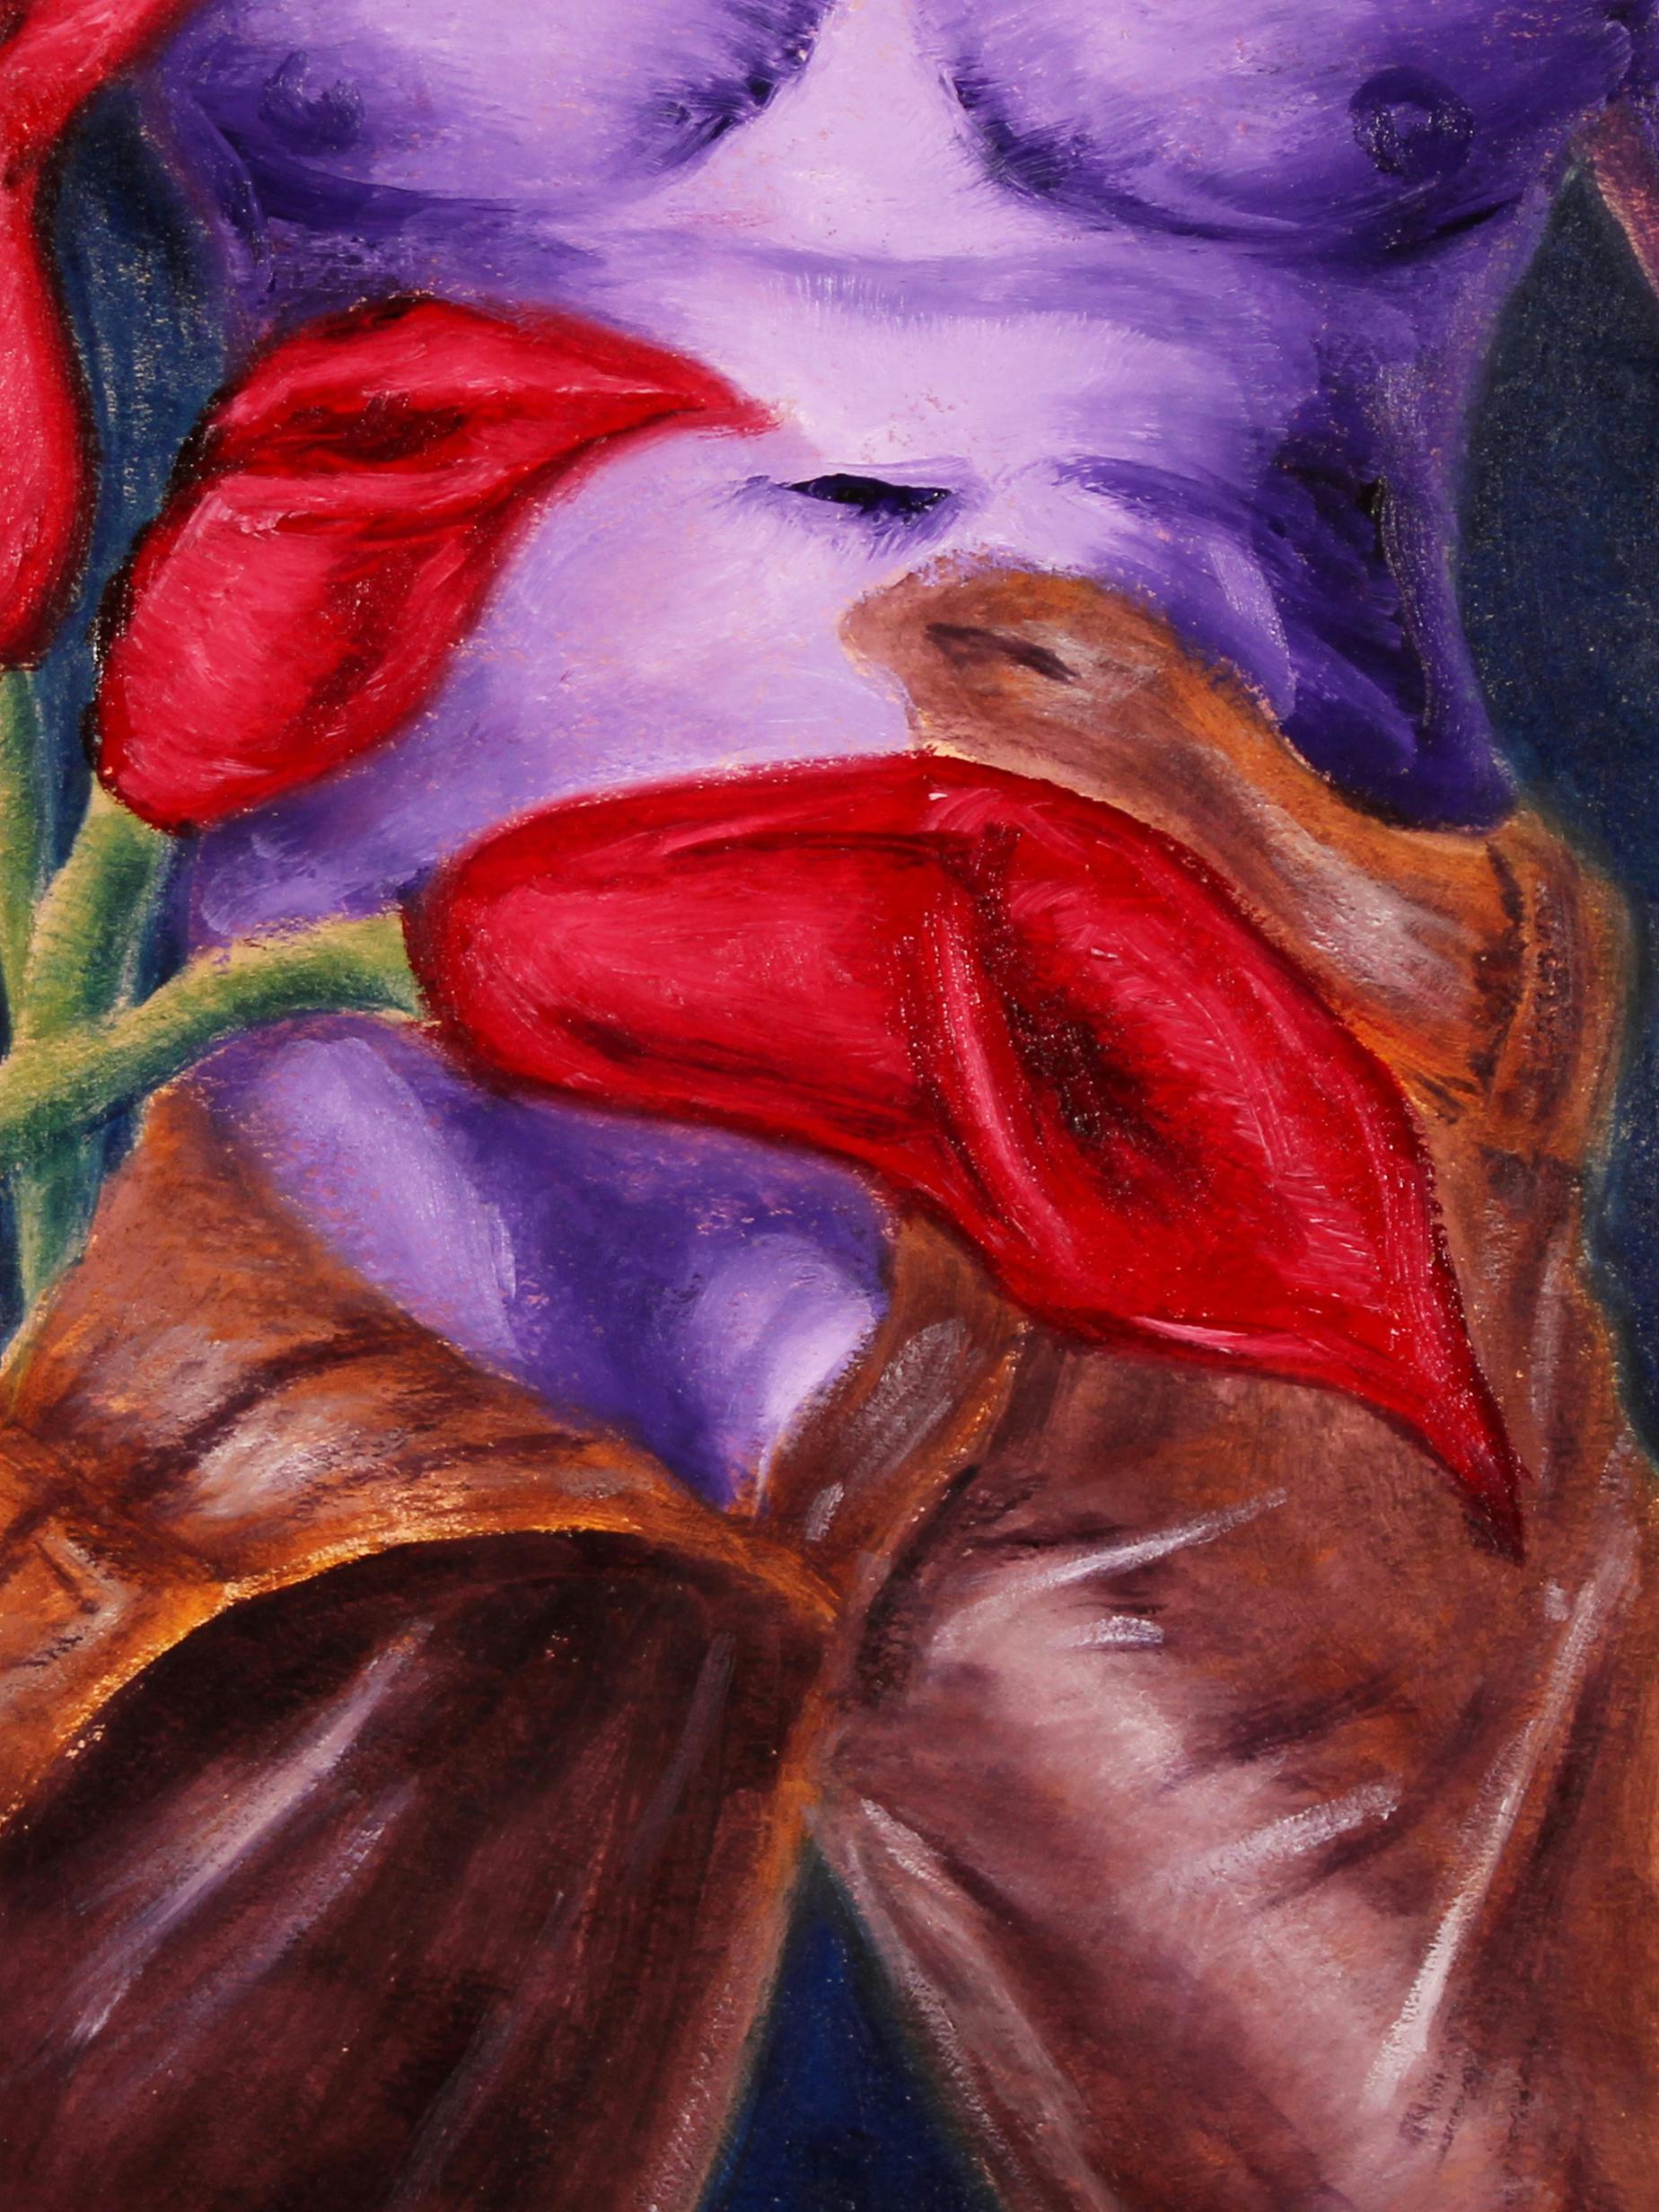 painting of purple male torso, visible erection, and bright red lilies